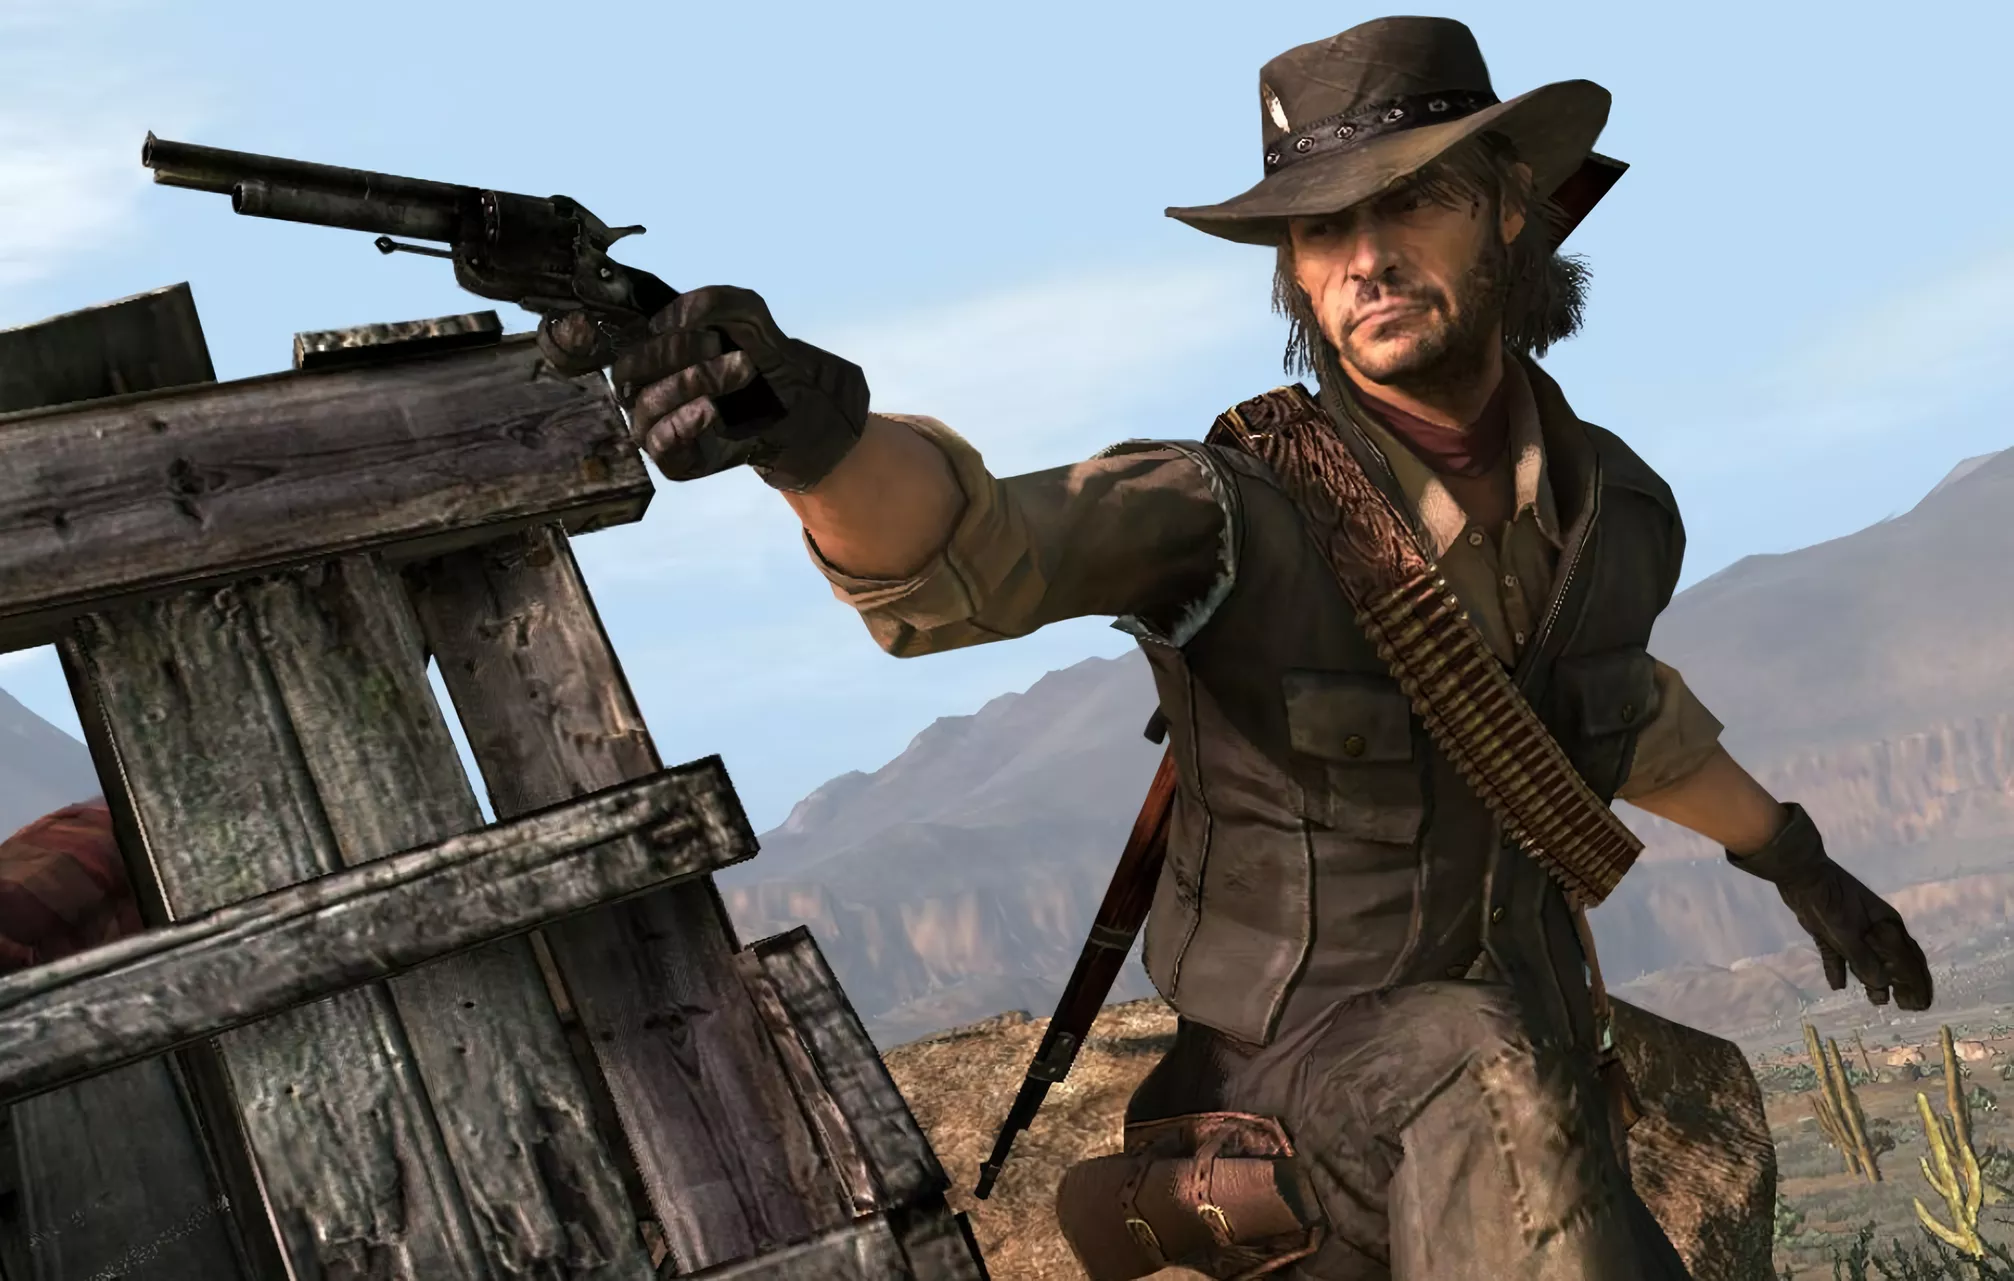 Red Dead Redemption is coming to PlayStation 4 and Nintendo Switch, but not the PC